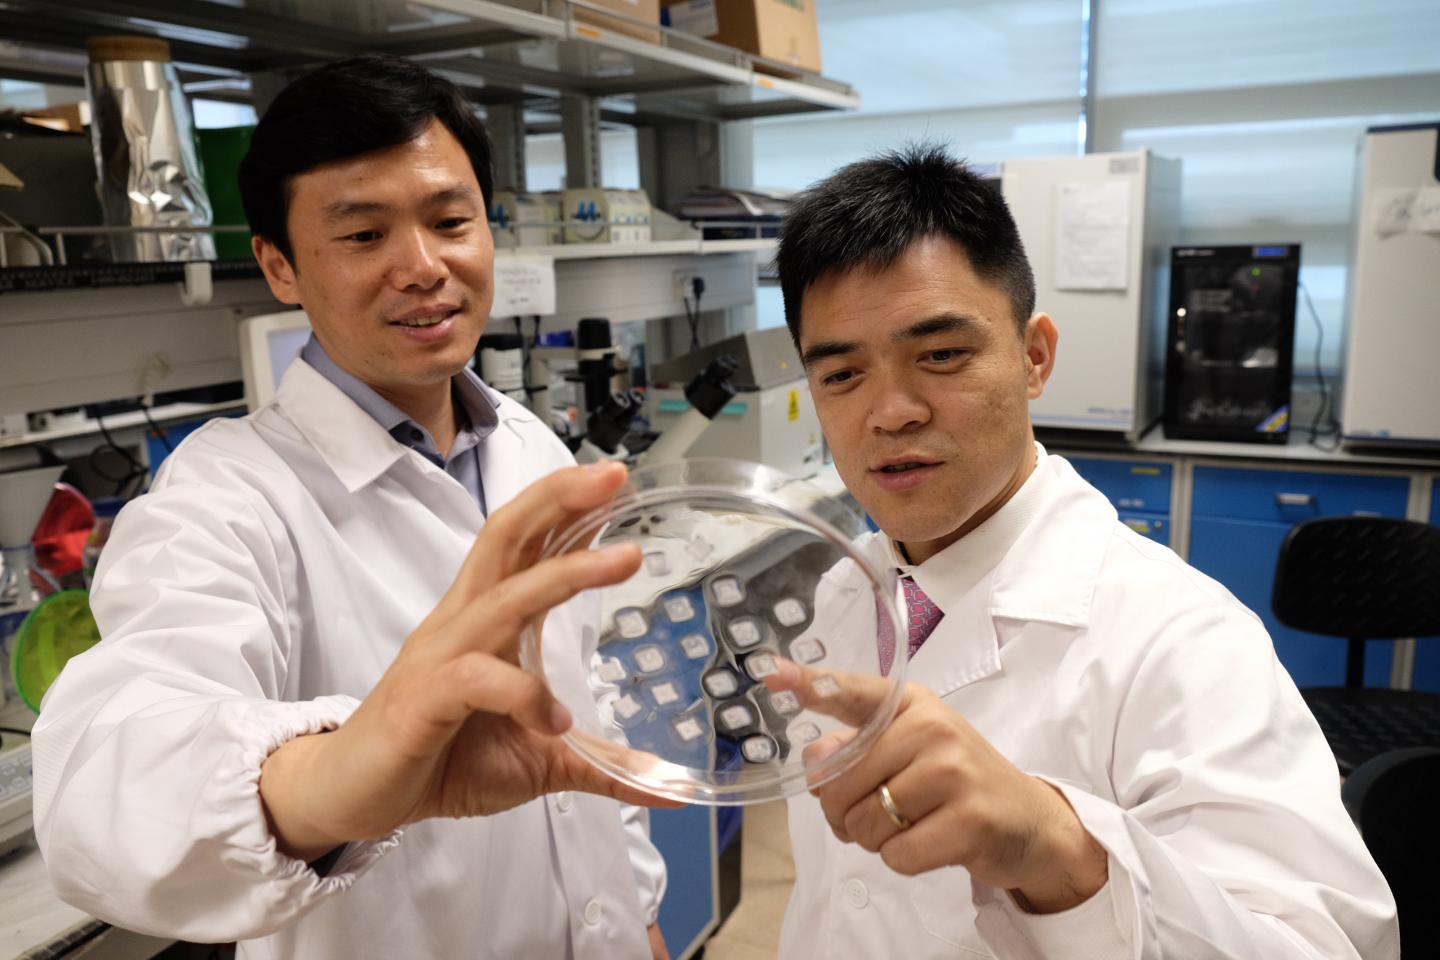 Prof Chen Peng (left) holding the new microneedle fat burning patch with Asst Prof Xu Chenjie. (Source: NTU Singapore)